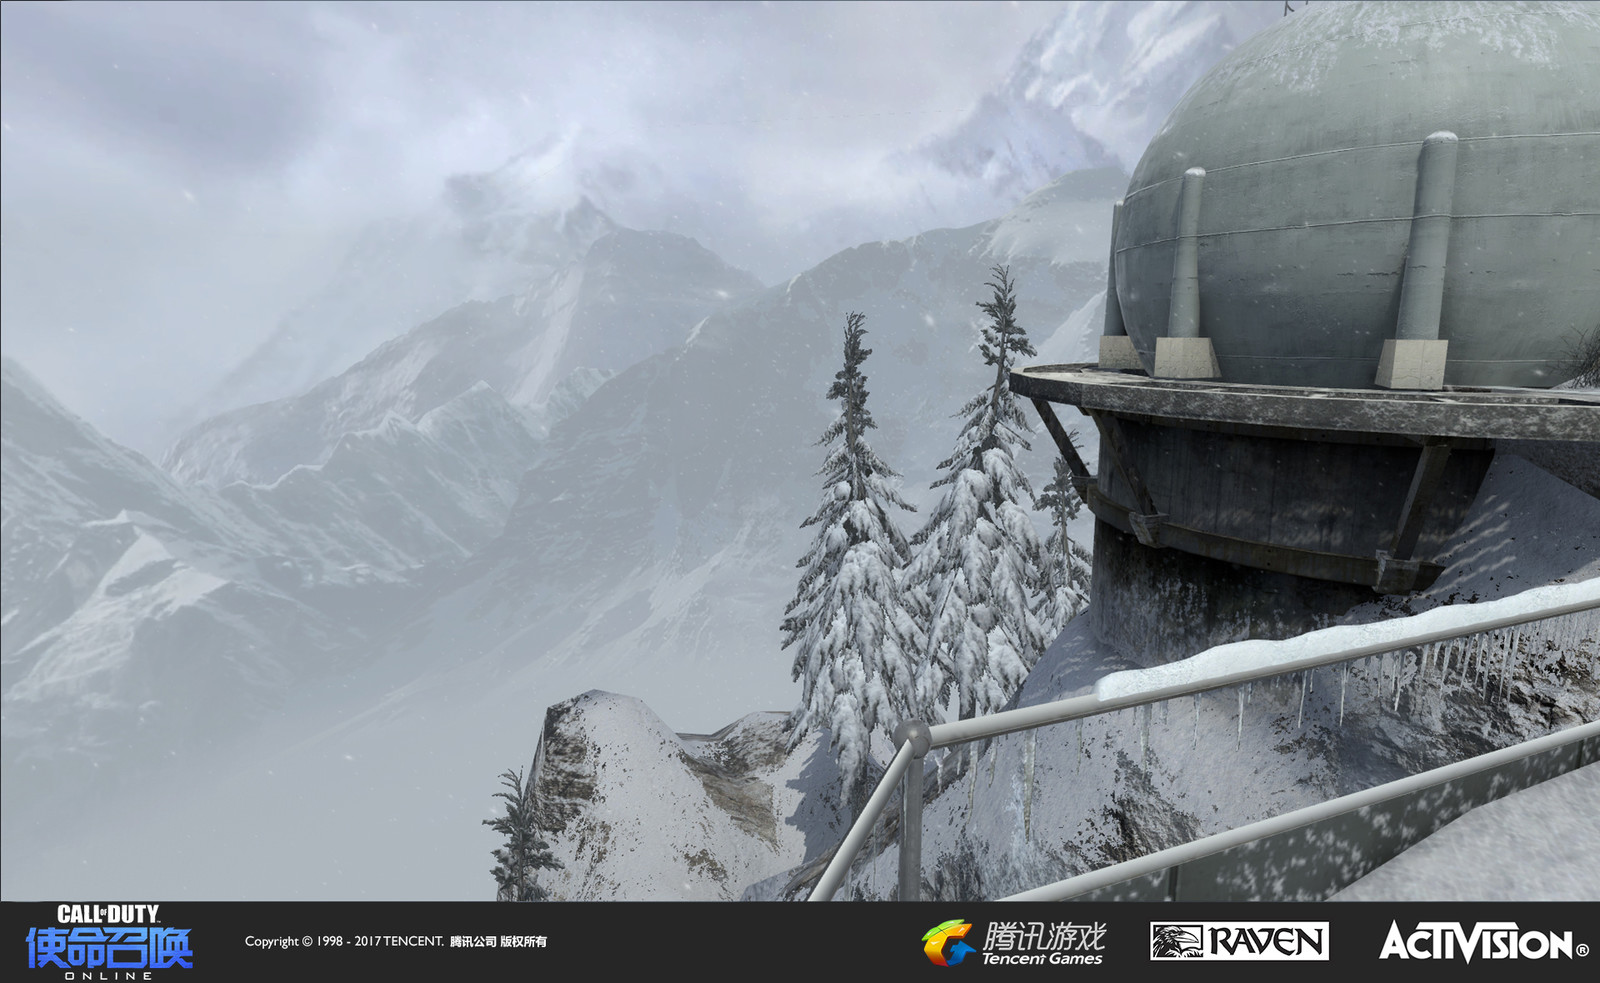 Summit: I recreated the vista of this map from its original version in Black Ops. I made the snow patterns and textures on the near-vista terrain, geo for the fuel pod, and set up the mountains and atmosphere. Jeff Degenhardt created the mountains.